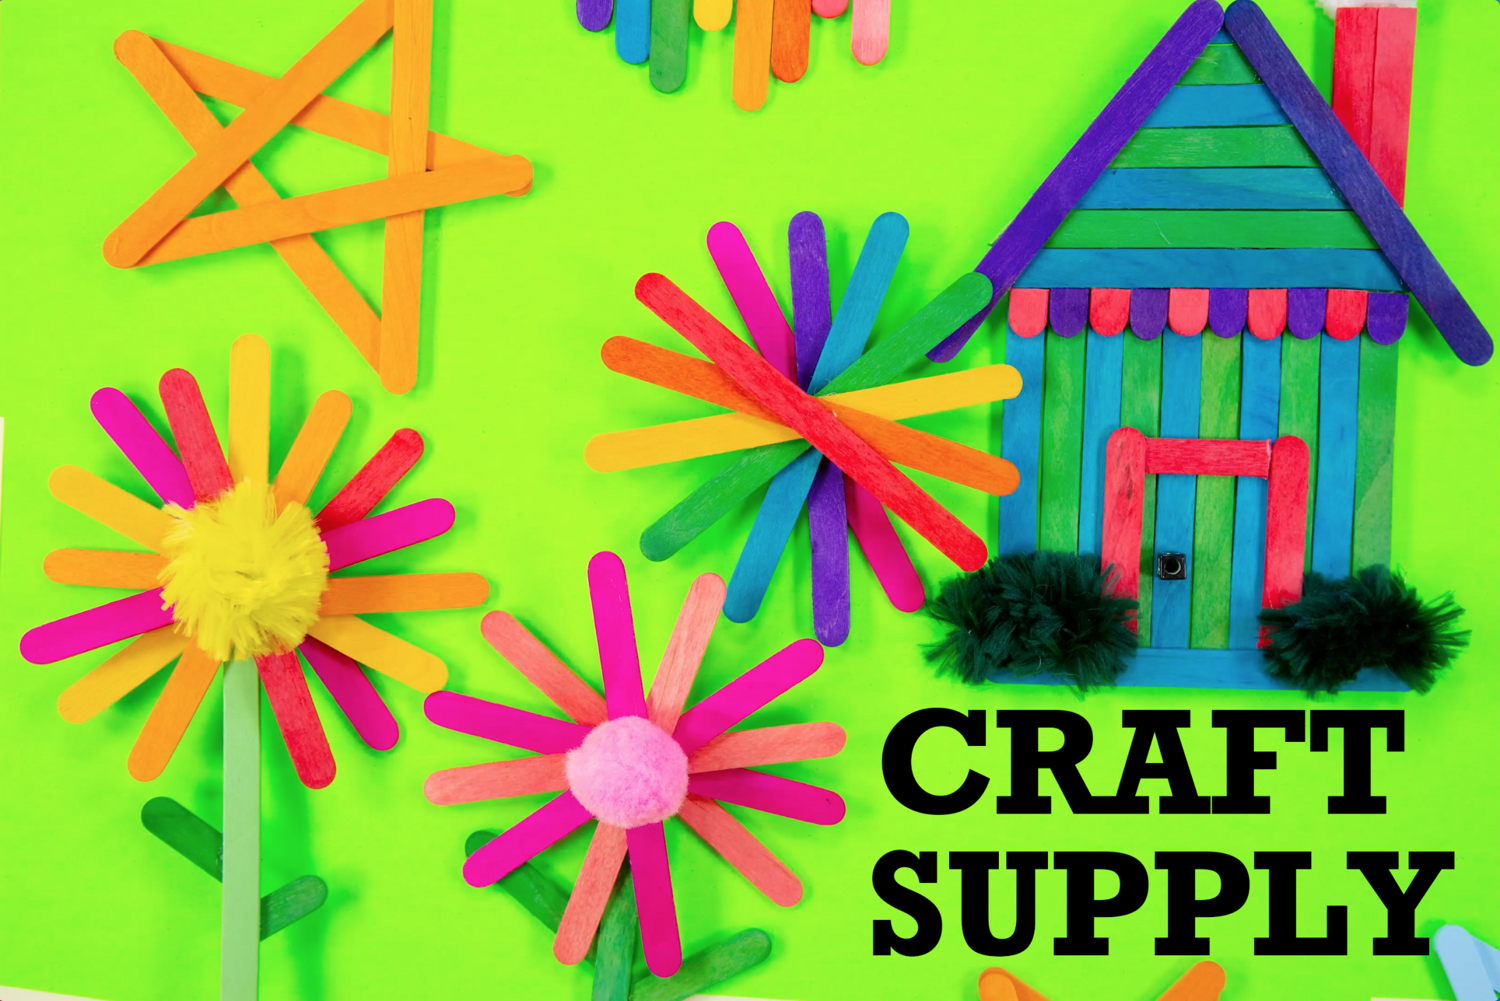 Smarts & Crafts Craft Supply Library Art & Craft Kit 1057 Pieces